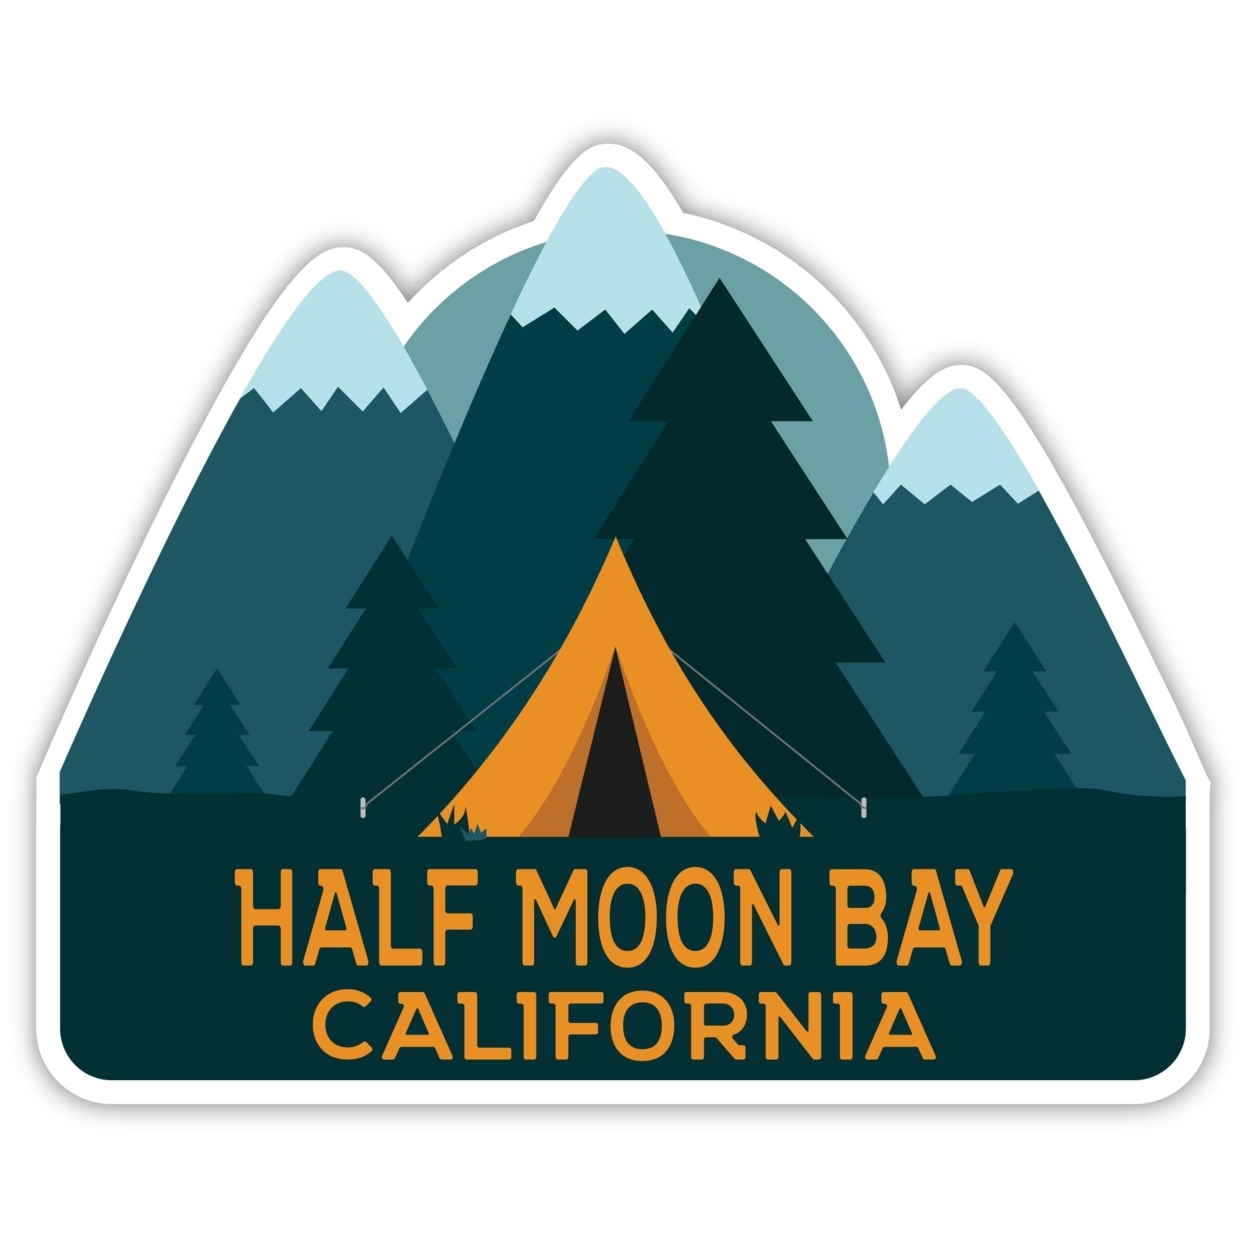 Half Moon Bay California Souvenir Decorative Stickers (Choose Theme And Size) - 4-Pack, 10-Inch, Bear